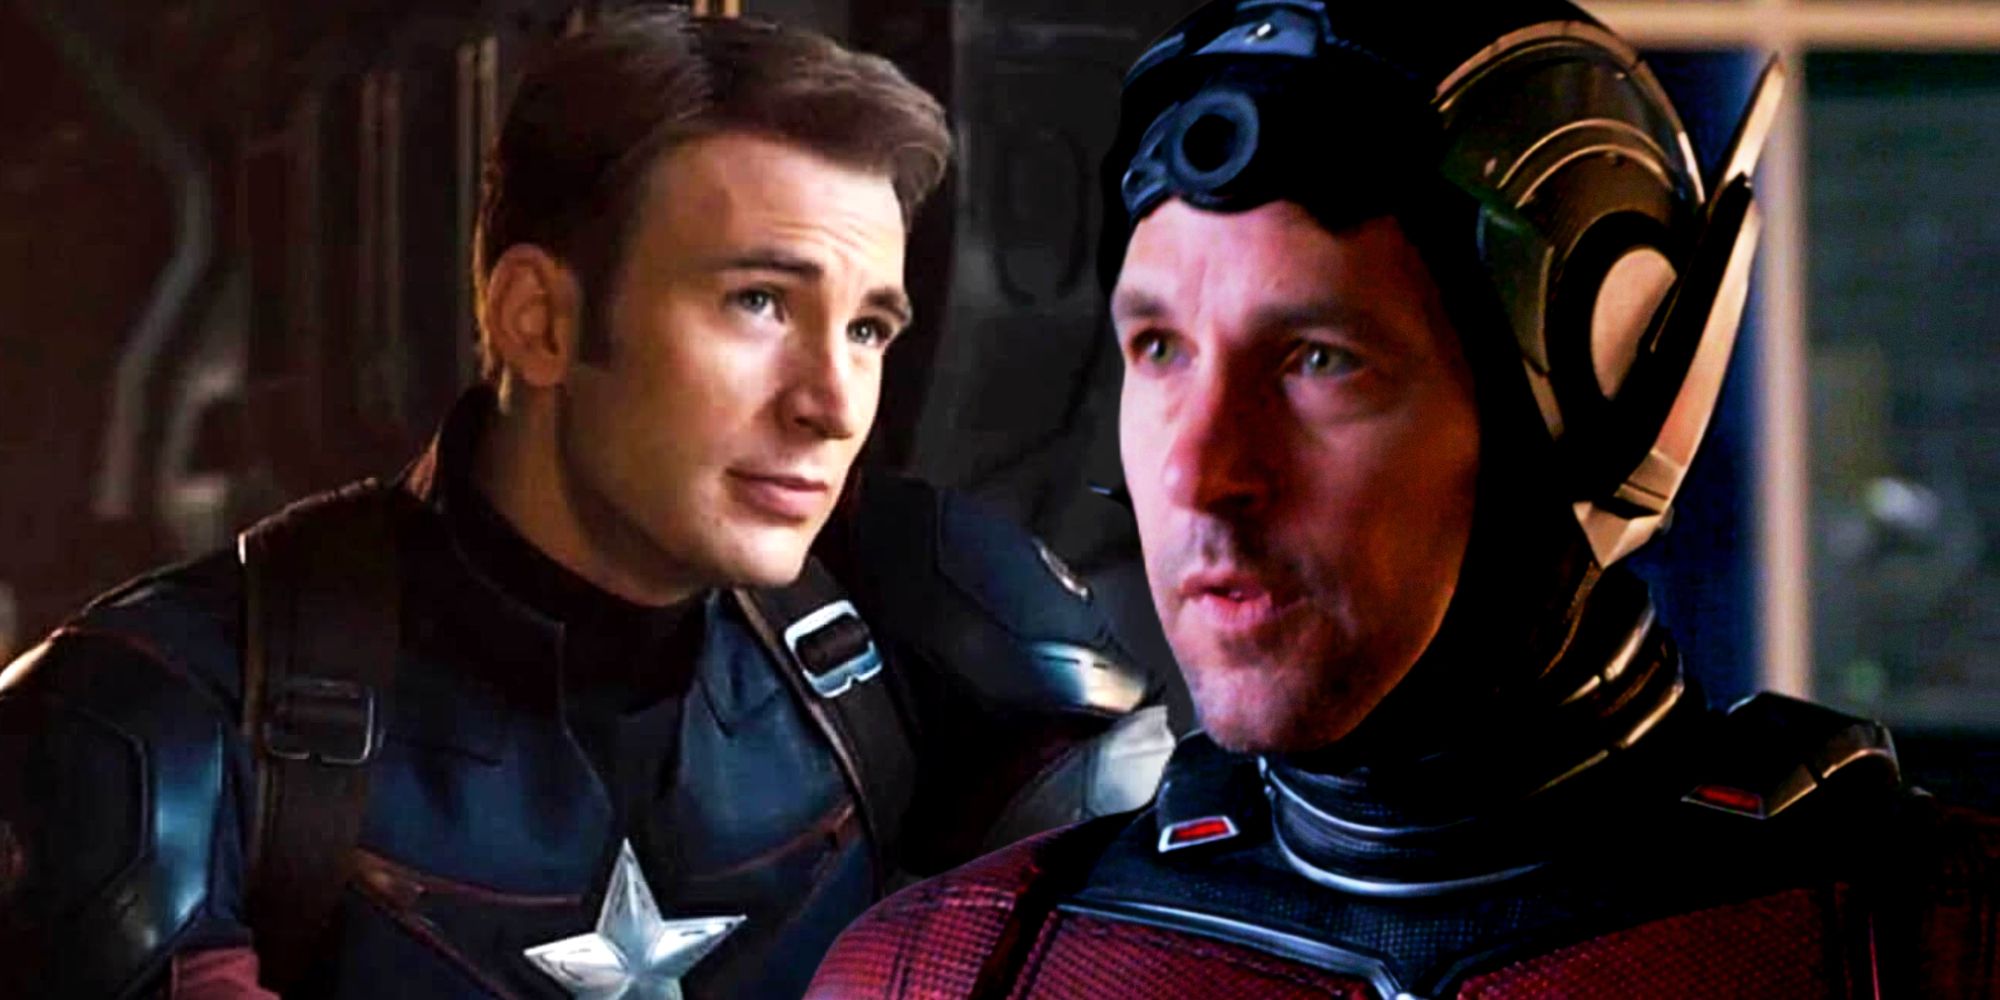 Captain America and Ant-Man in the MCU's Avengers